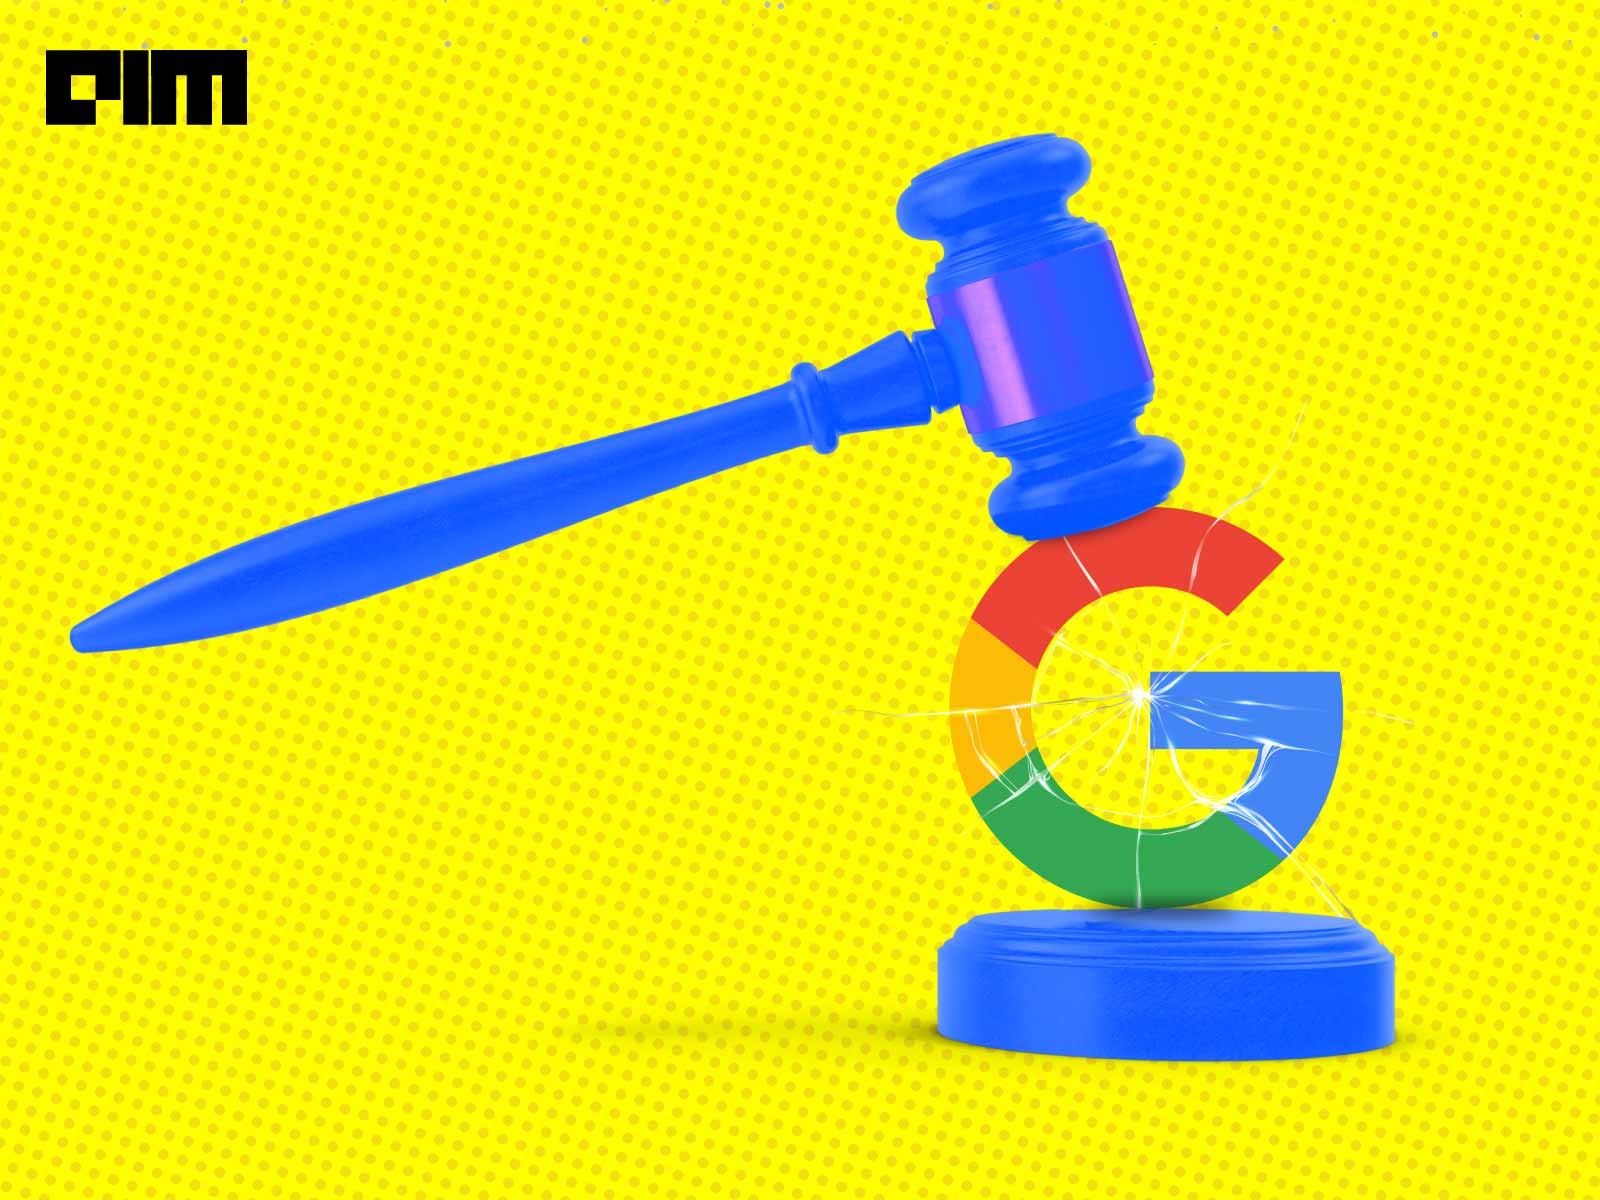 Big Tech Breakup: Google Blamed For Running A Monopoly, Case Filed